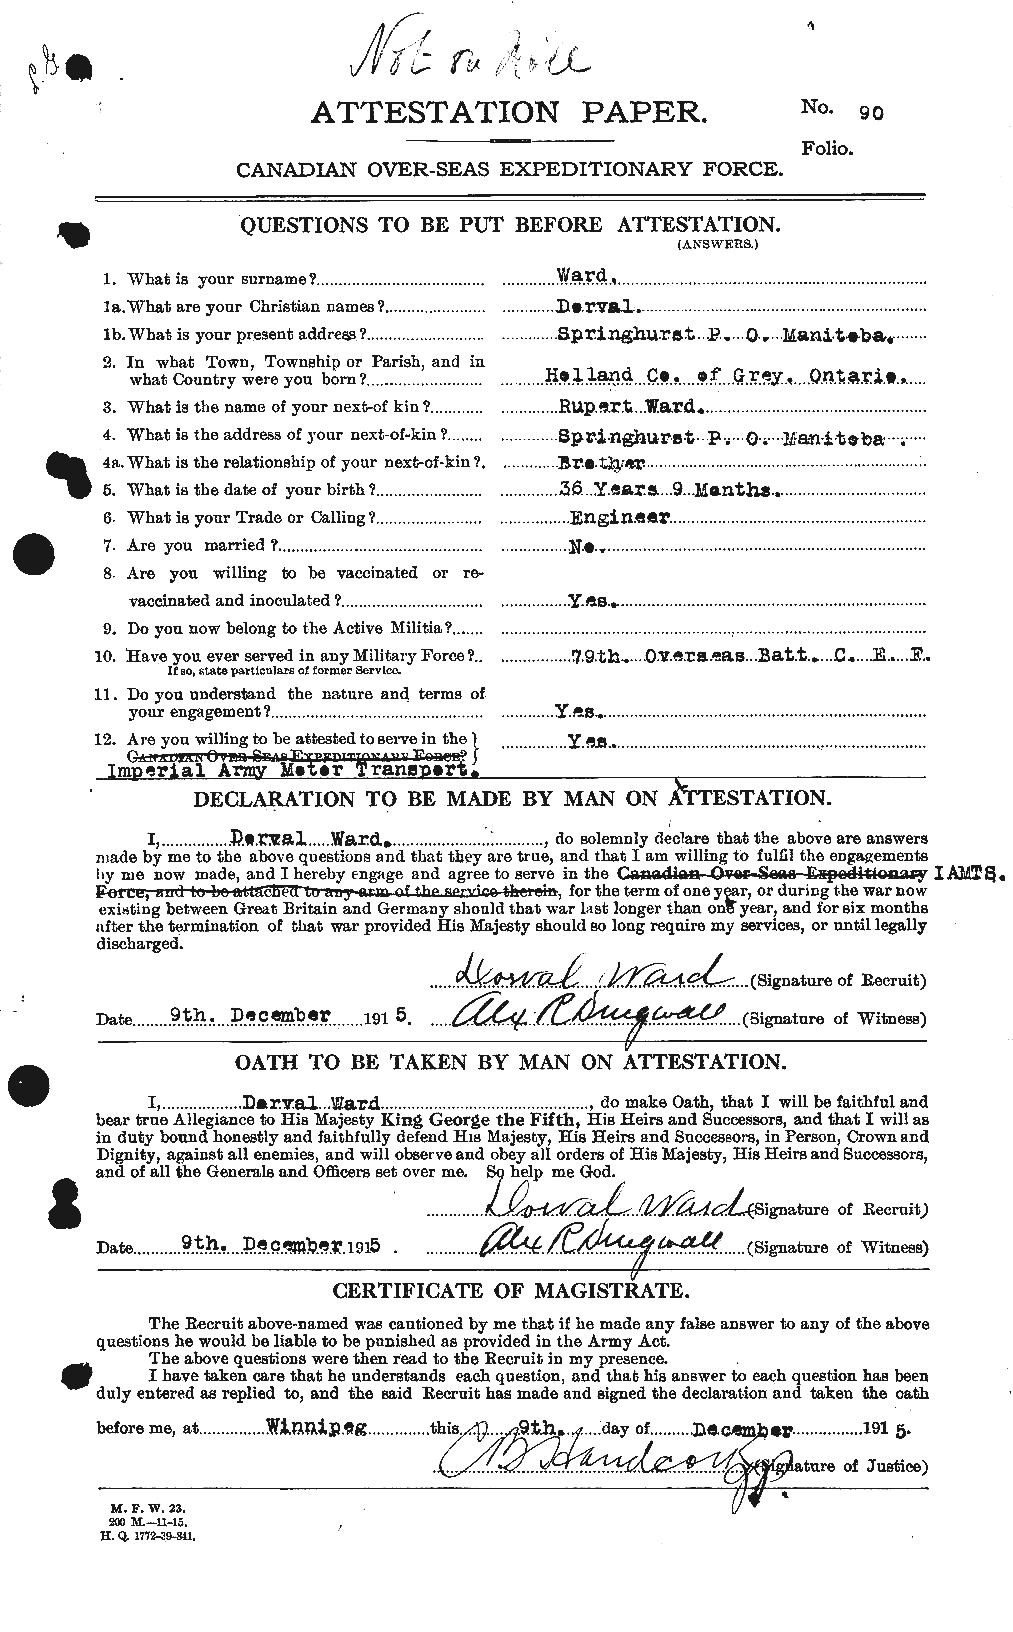 Personnel Records of the First World War - CEF 657627a